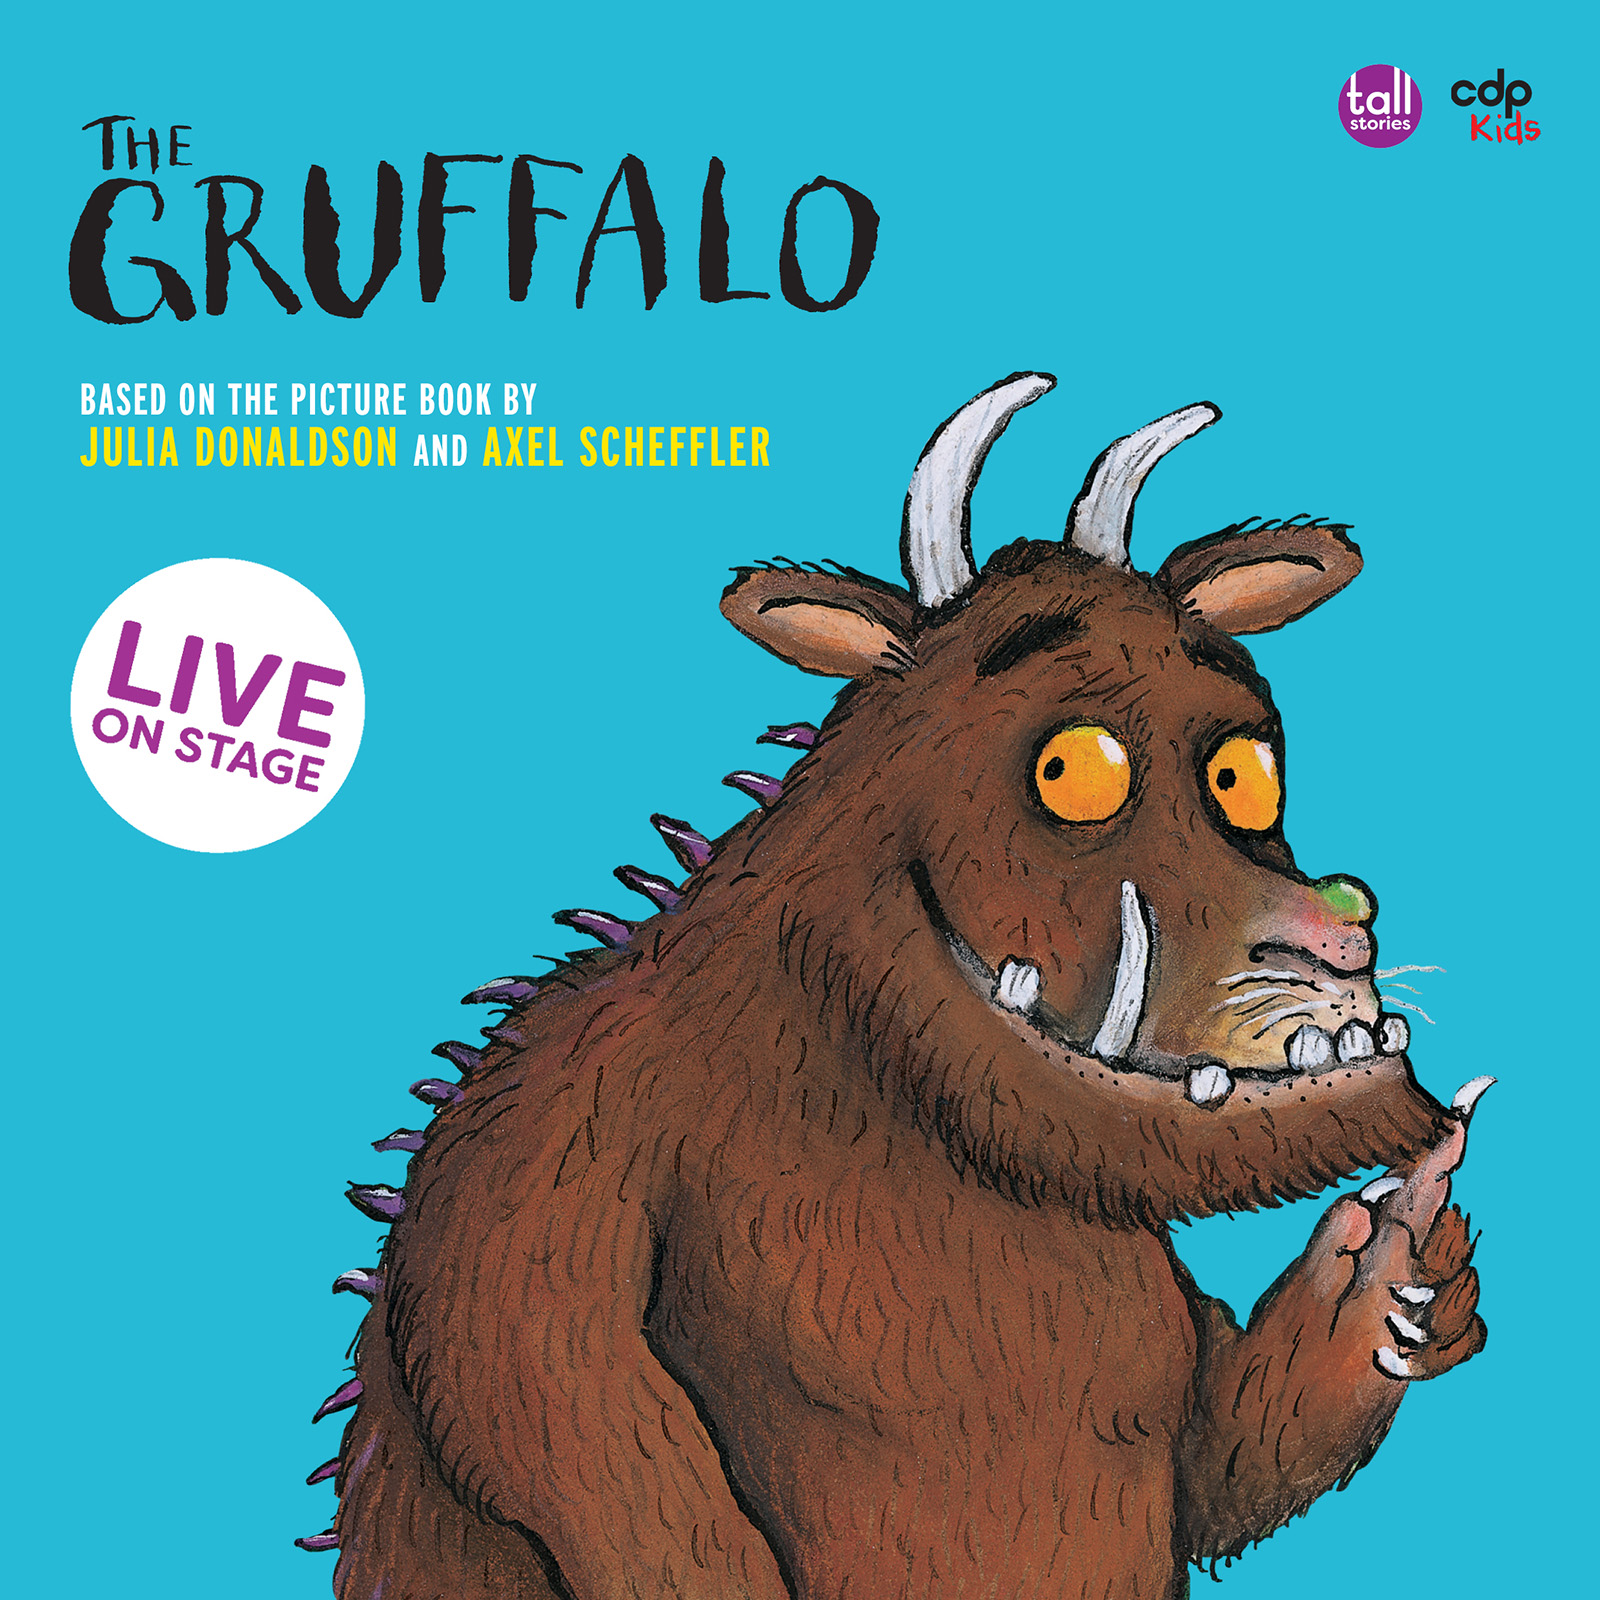 The Gruffalo Live on Stage, Adelaide Festival Centre